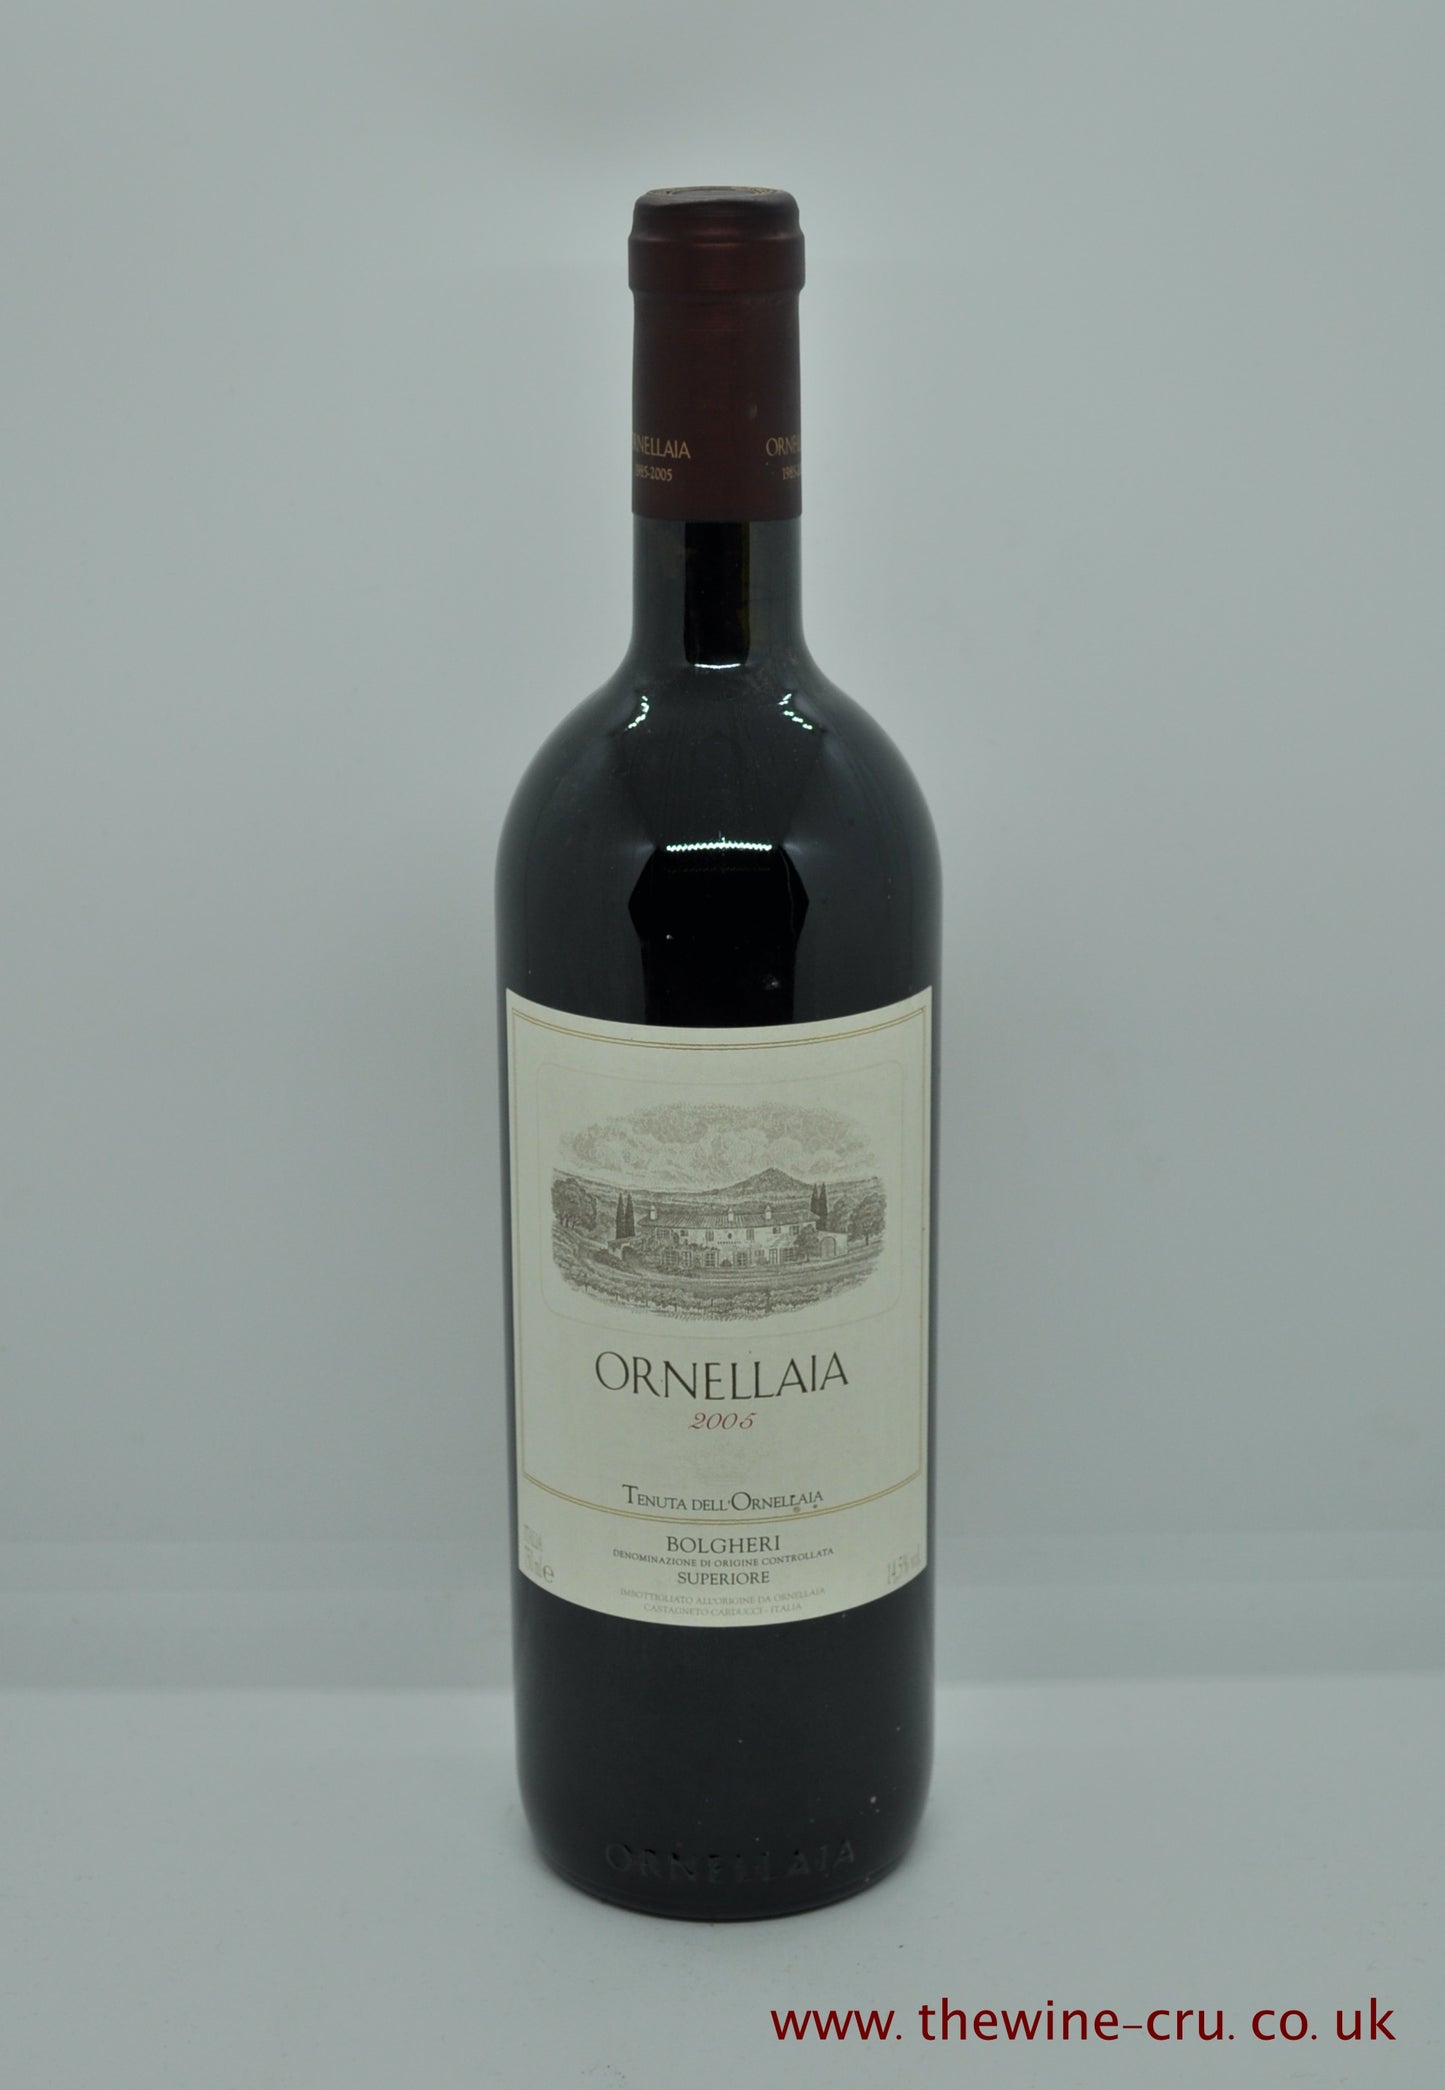 A bottle of 2005 vintage red wine from Ornellaia, Italy. The bottle is in good condition. Immediate delivery. Free local delivery. Gift wrapping available.